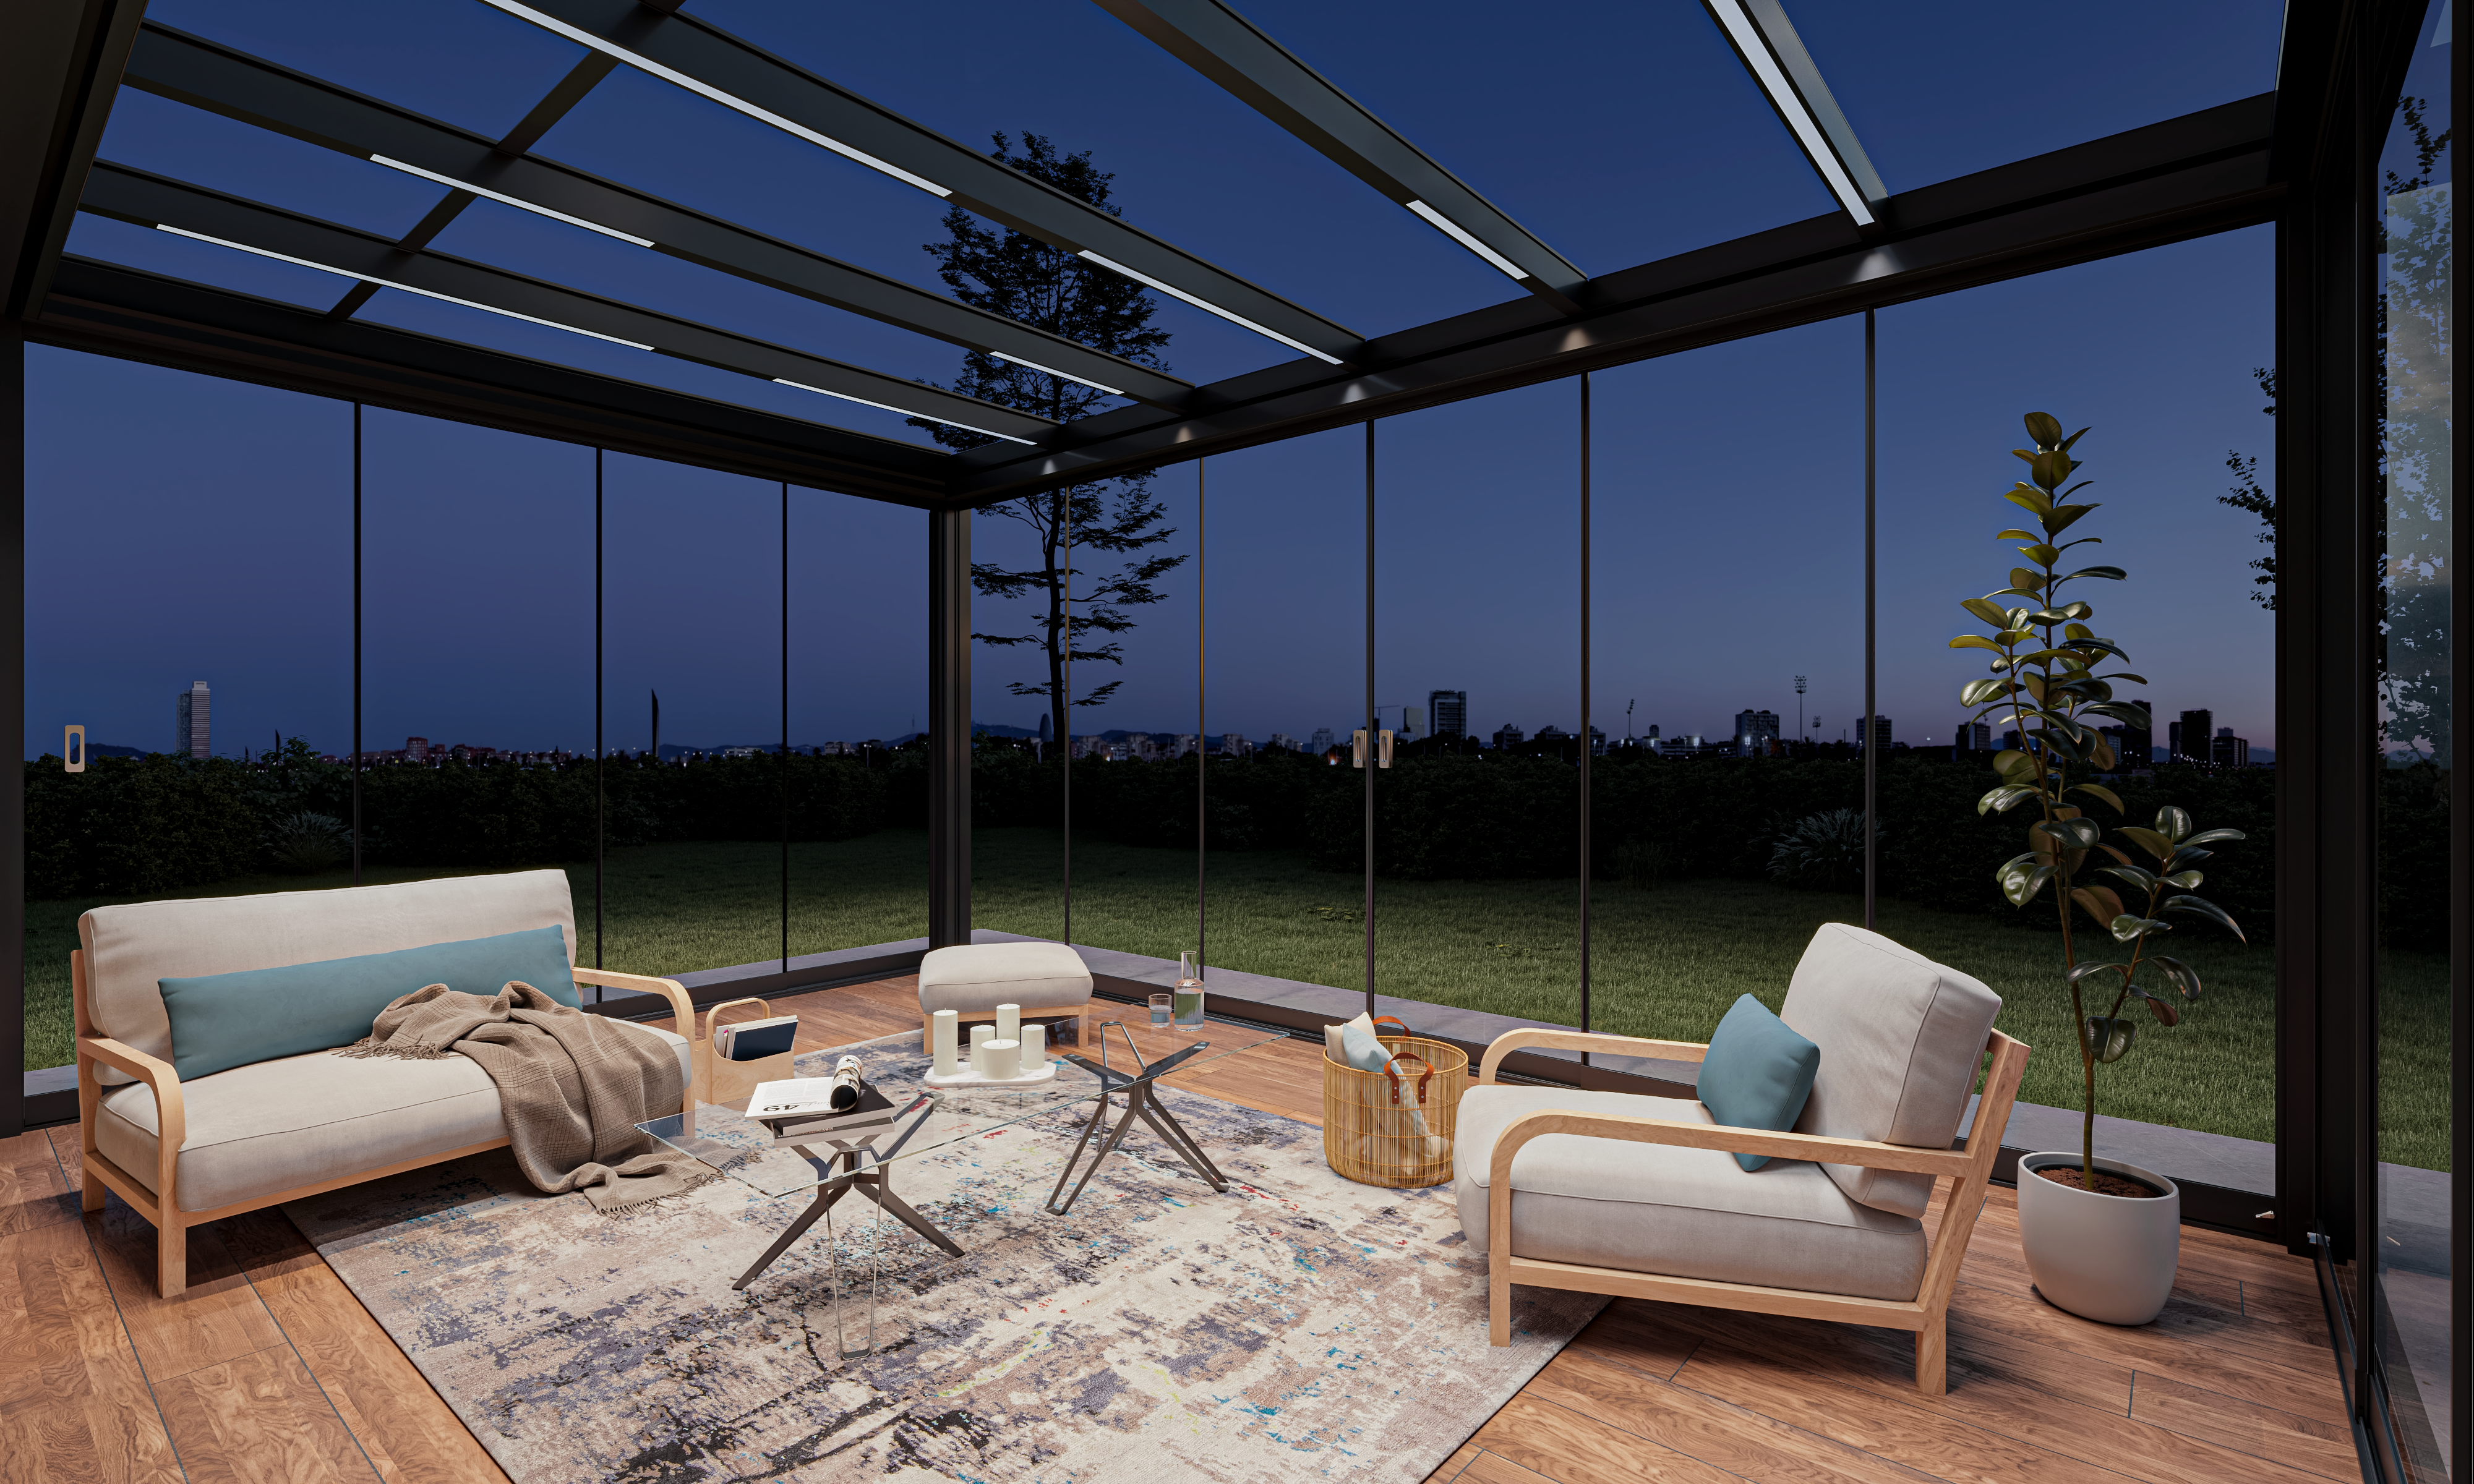 Schildr Dynamic Sunroom - Retractable Insulated Glass Canopy Retreat